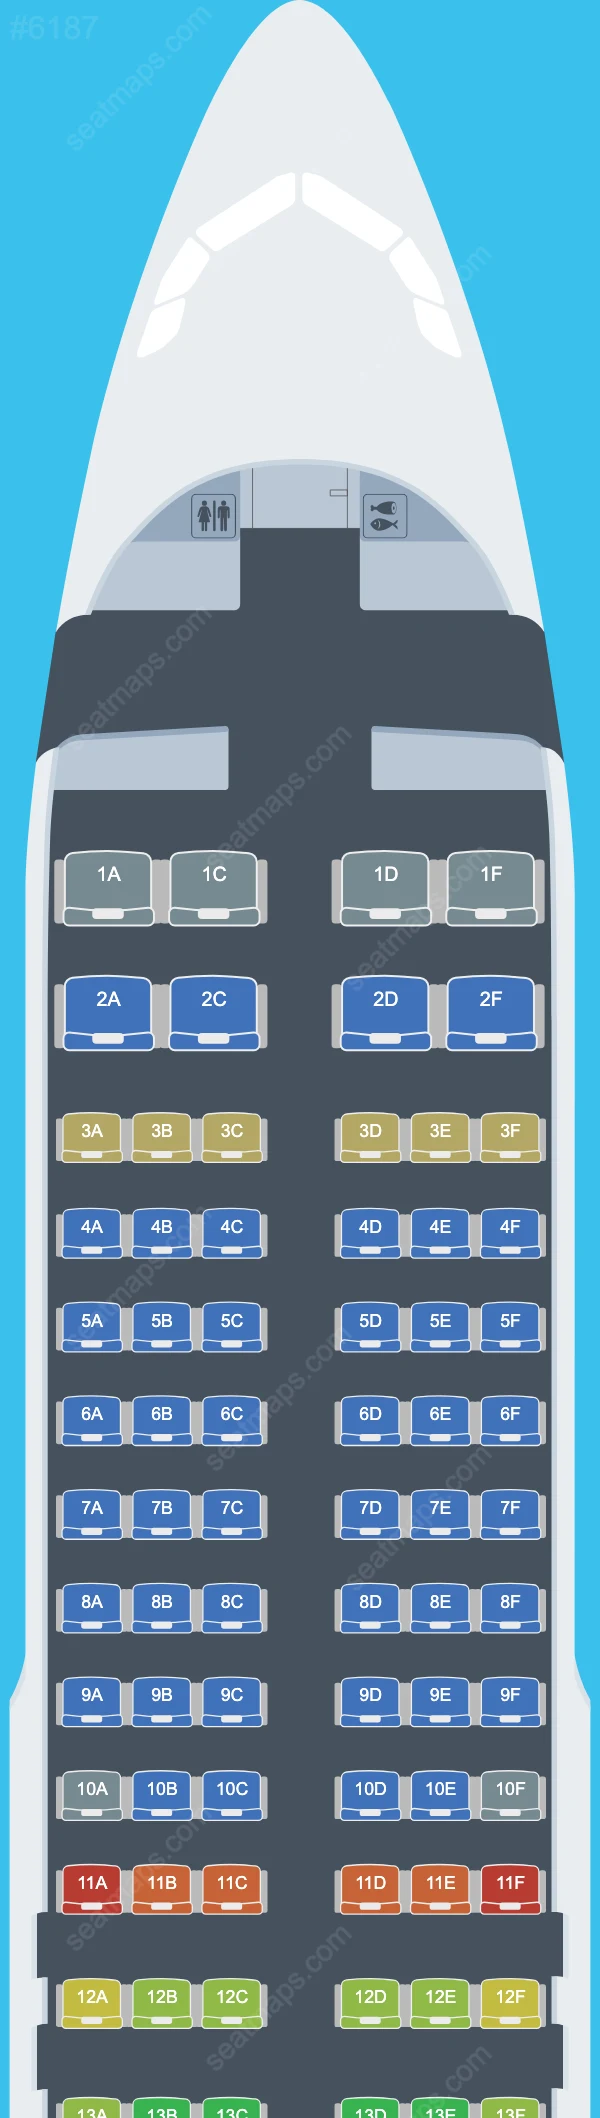 Spirit Airlines Airbus A320 Seat Maps A320-200